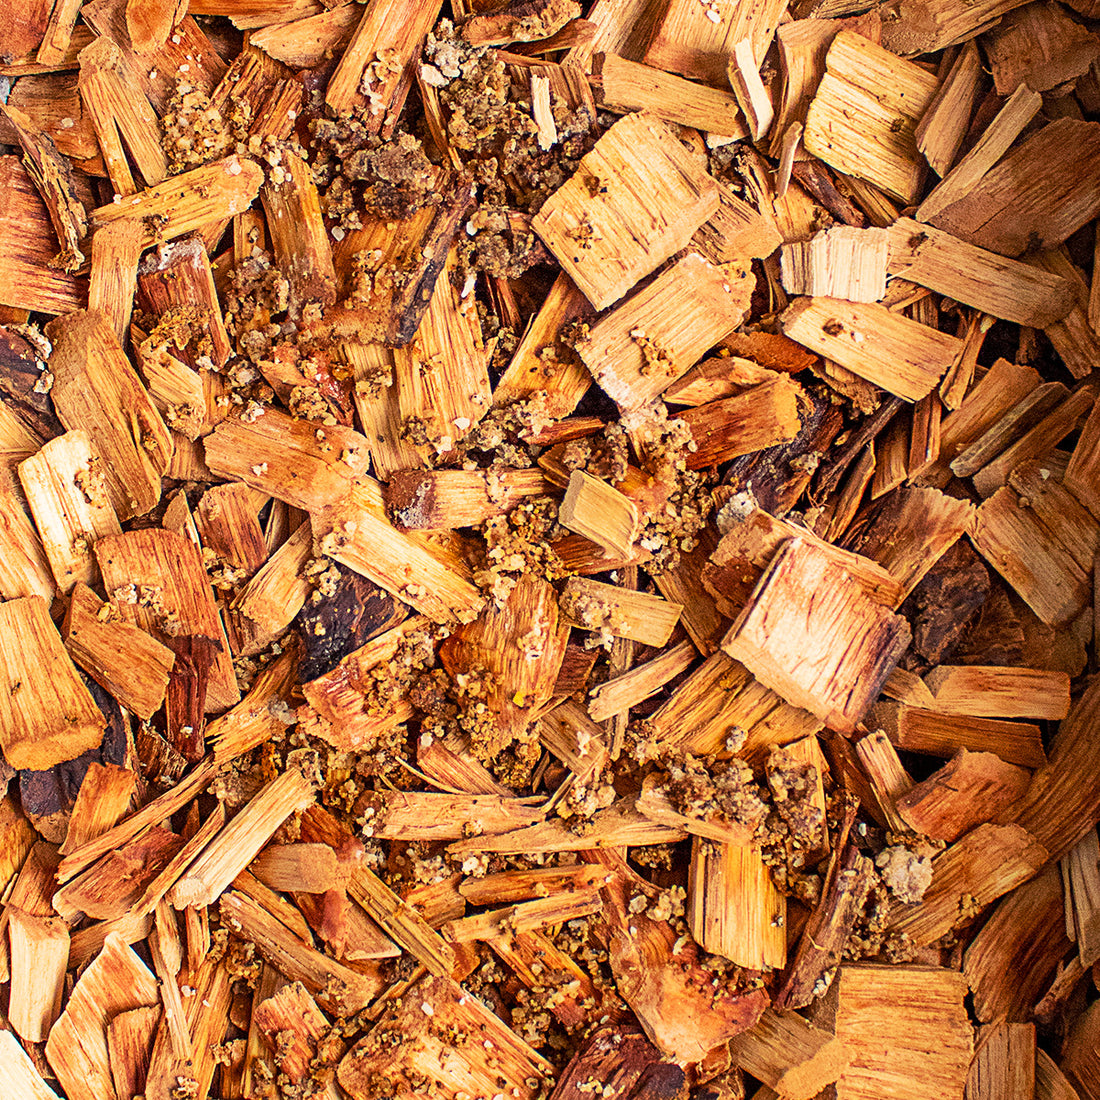 Wood Chips for Smoking Meat